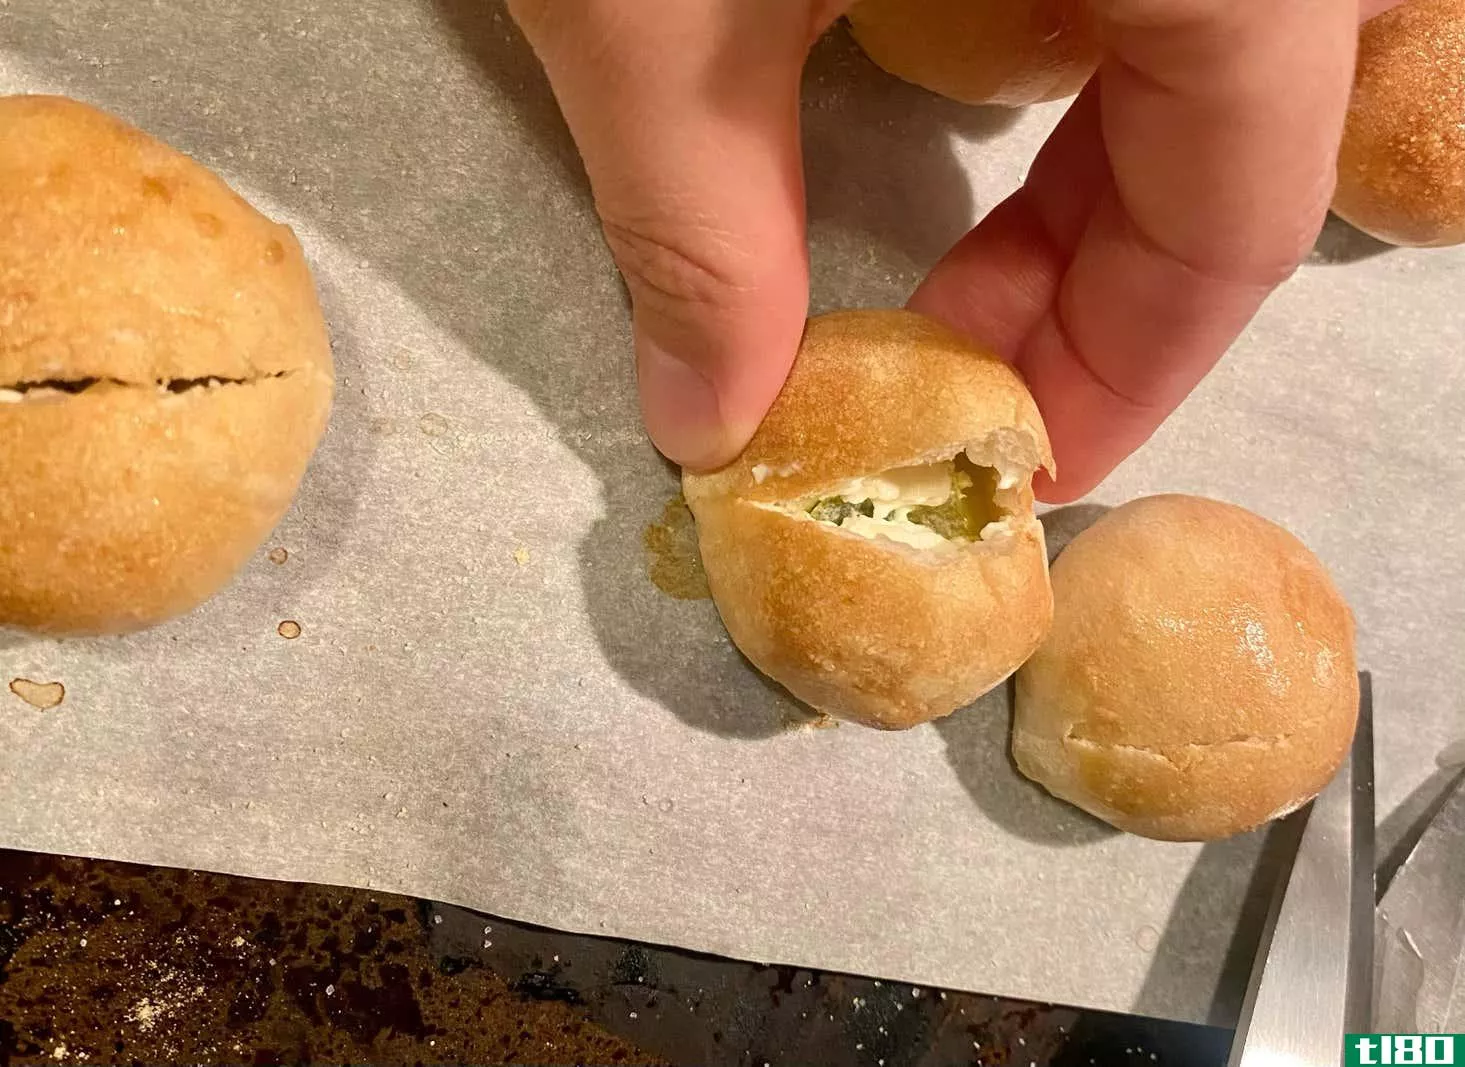 Image for article titled Make Jalapeño Popper Charcuterie Bites With Pizza Dough